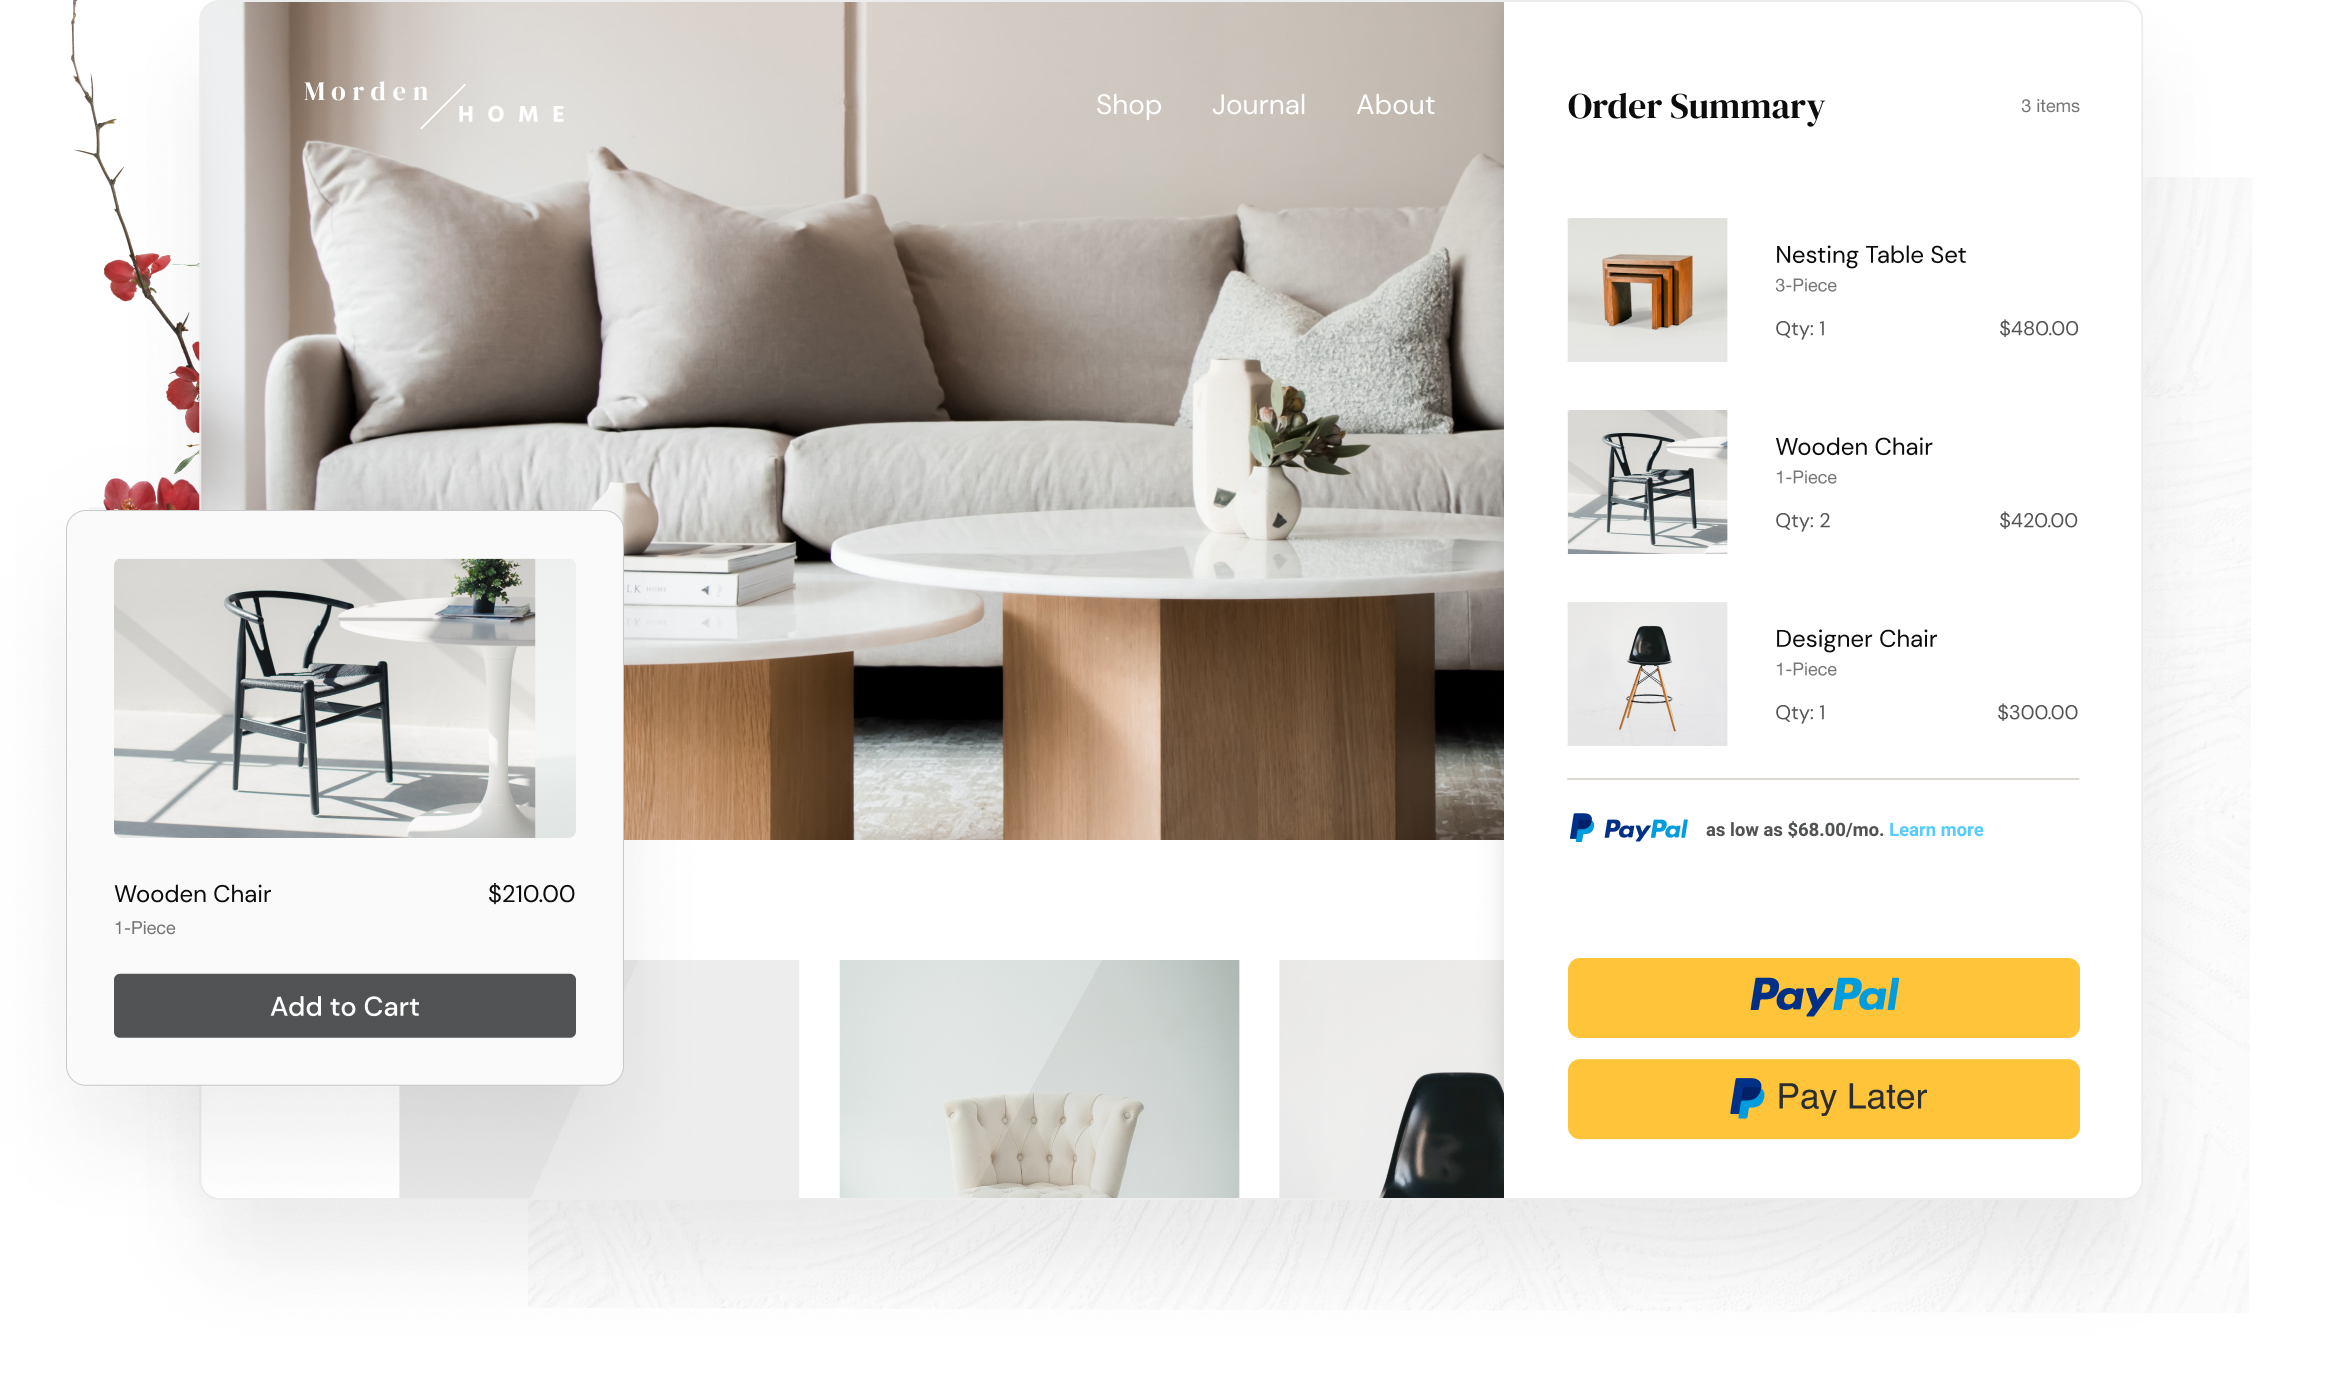 A website image showing a couch, chairs, and nesting tables being added to cart featuring Pay Later Messaging